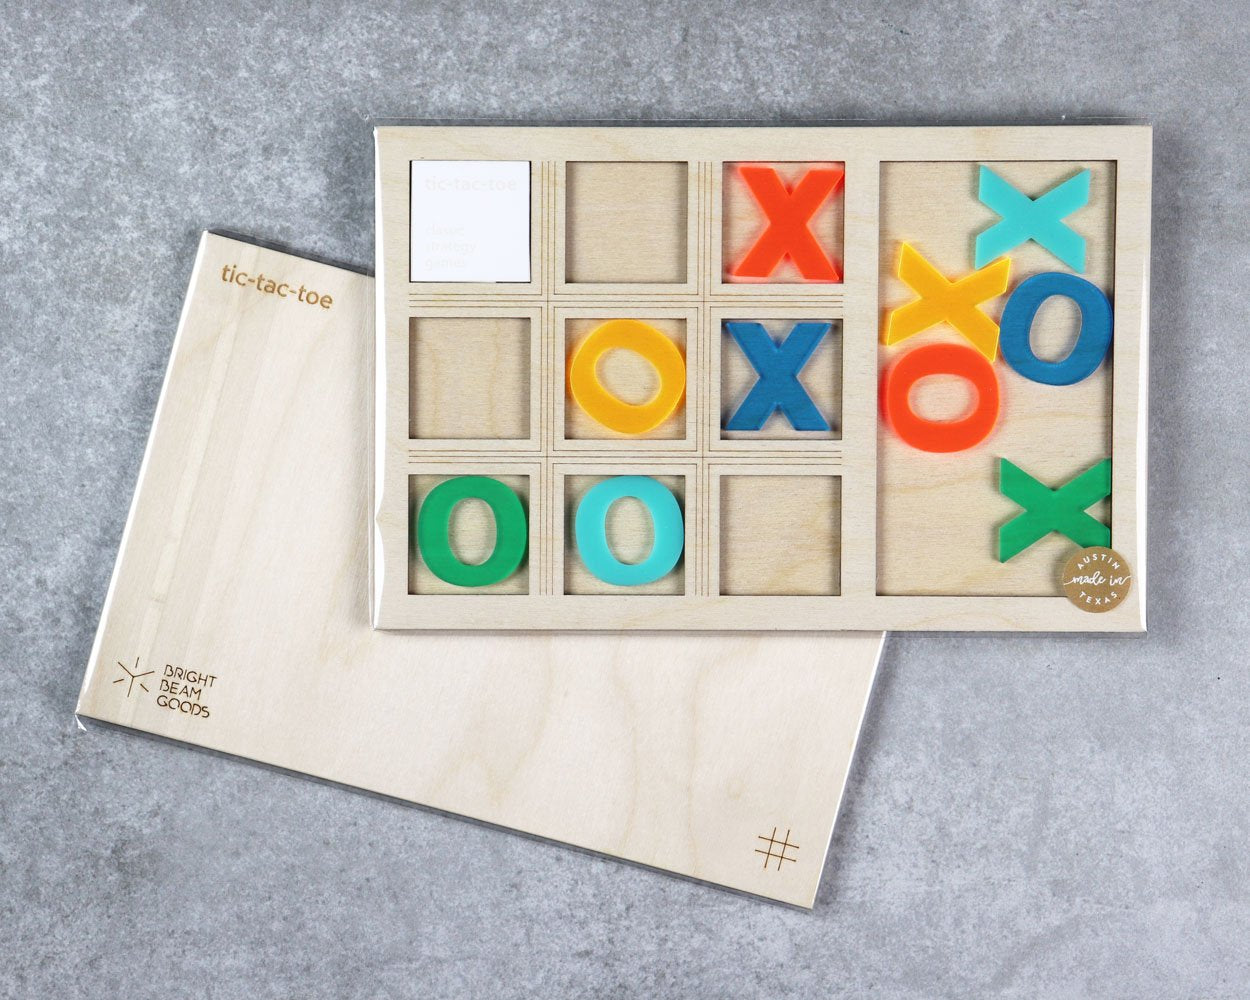 Pool party tic-tac-toe game in packaging